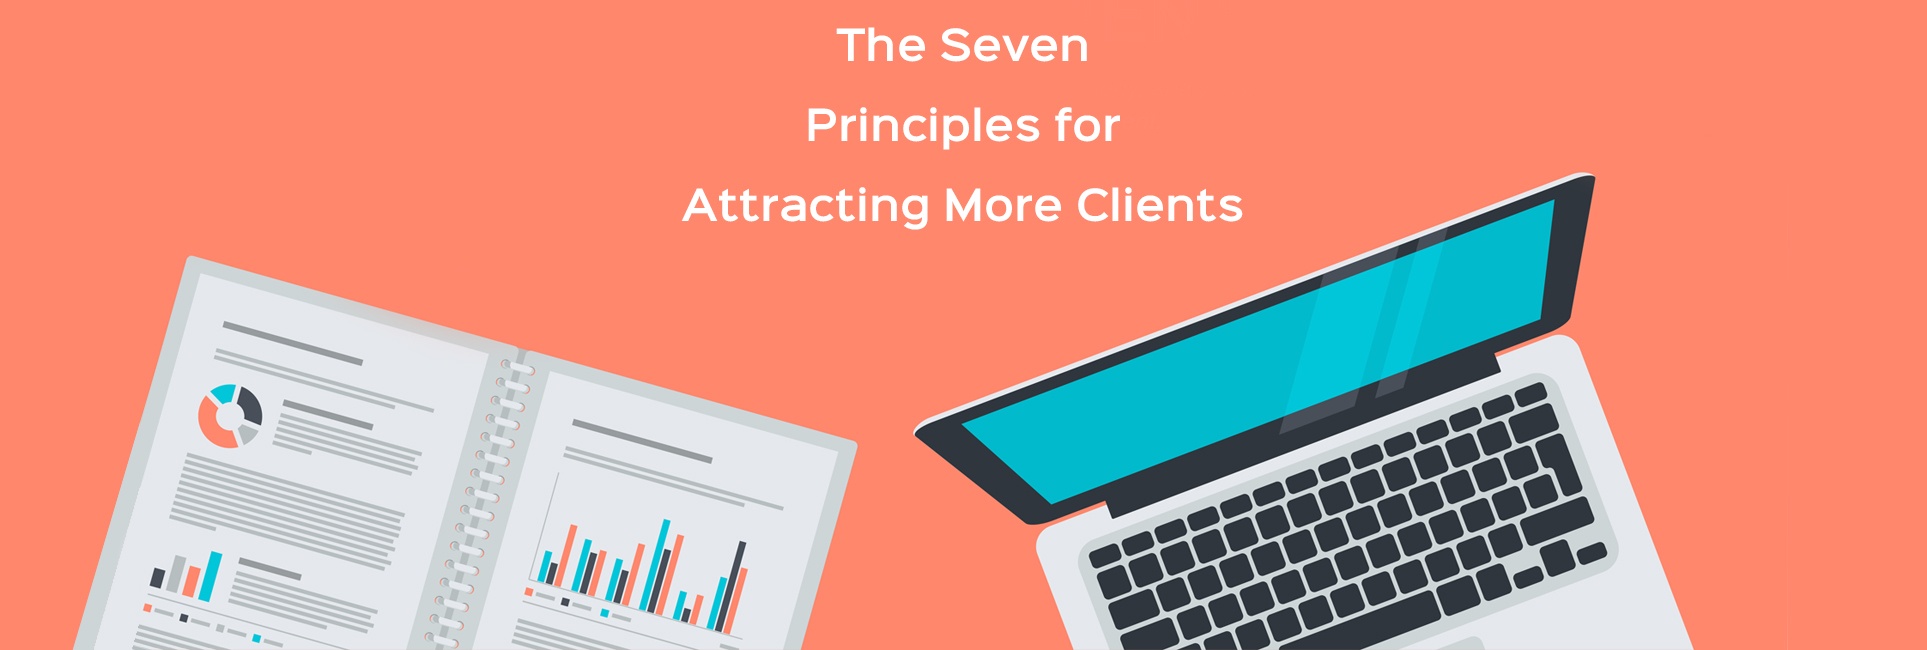 seven principles for attracting more clients